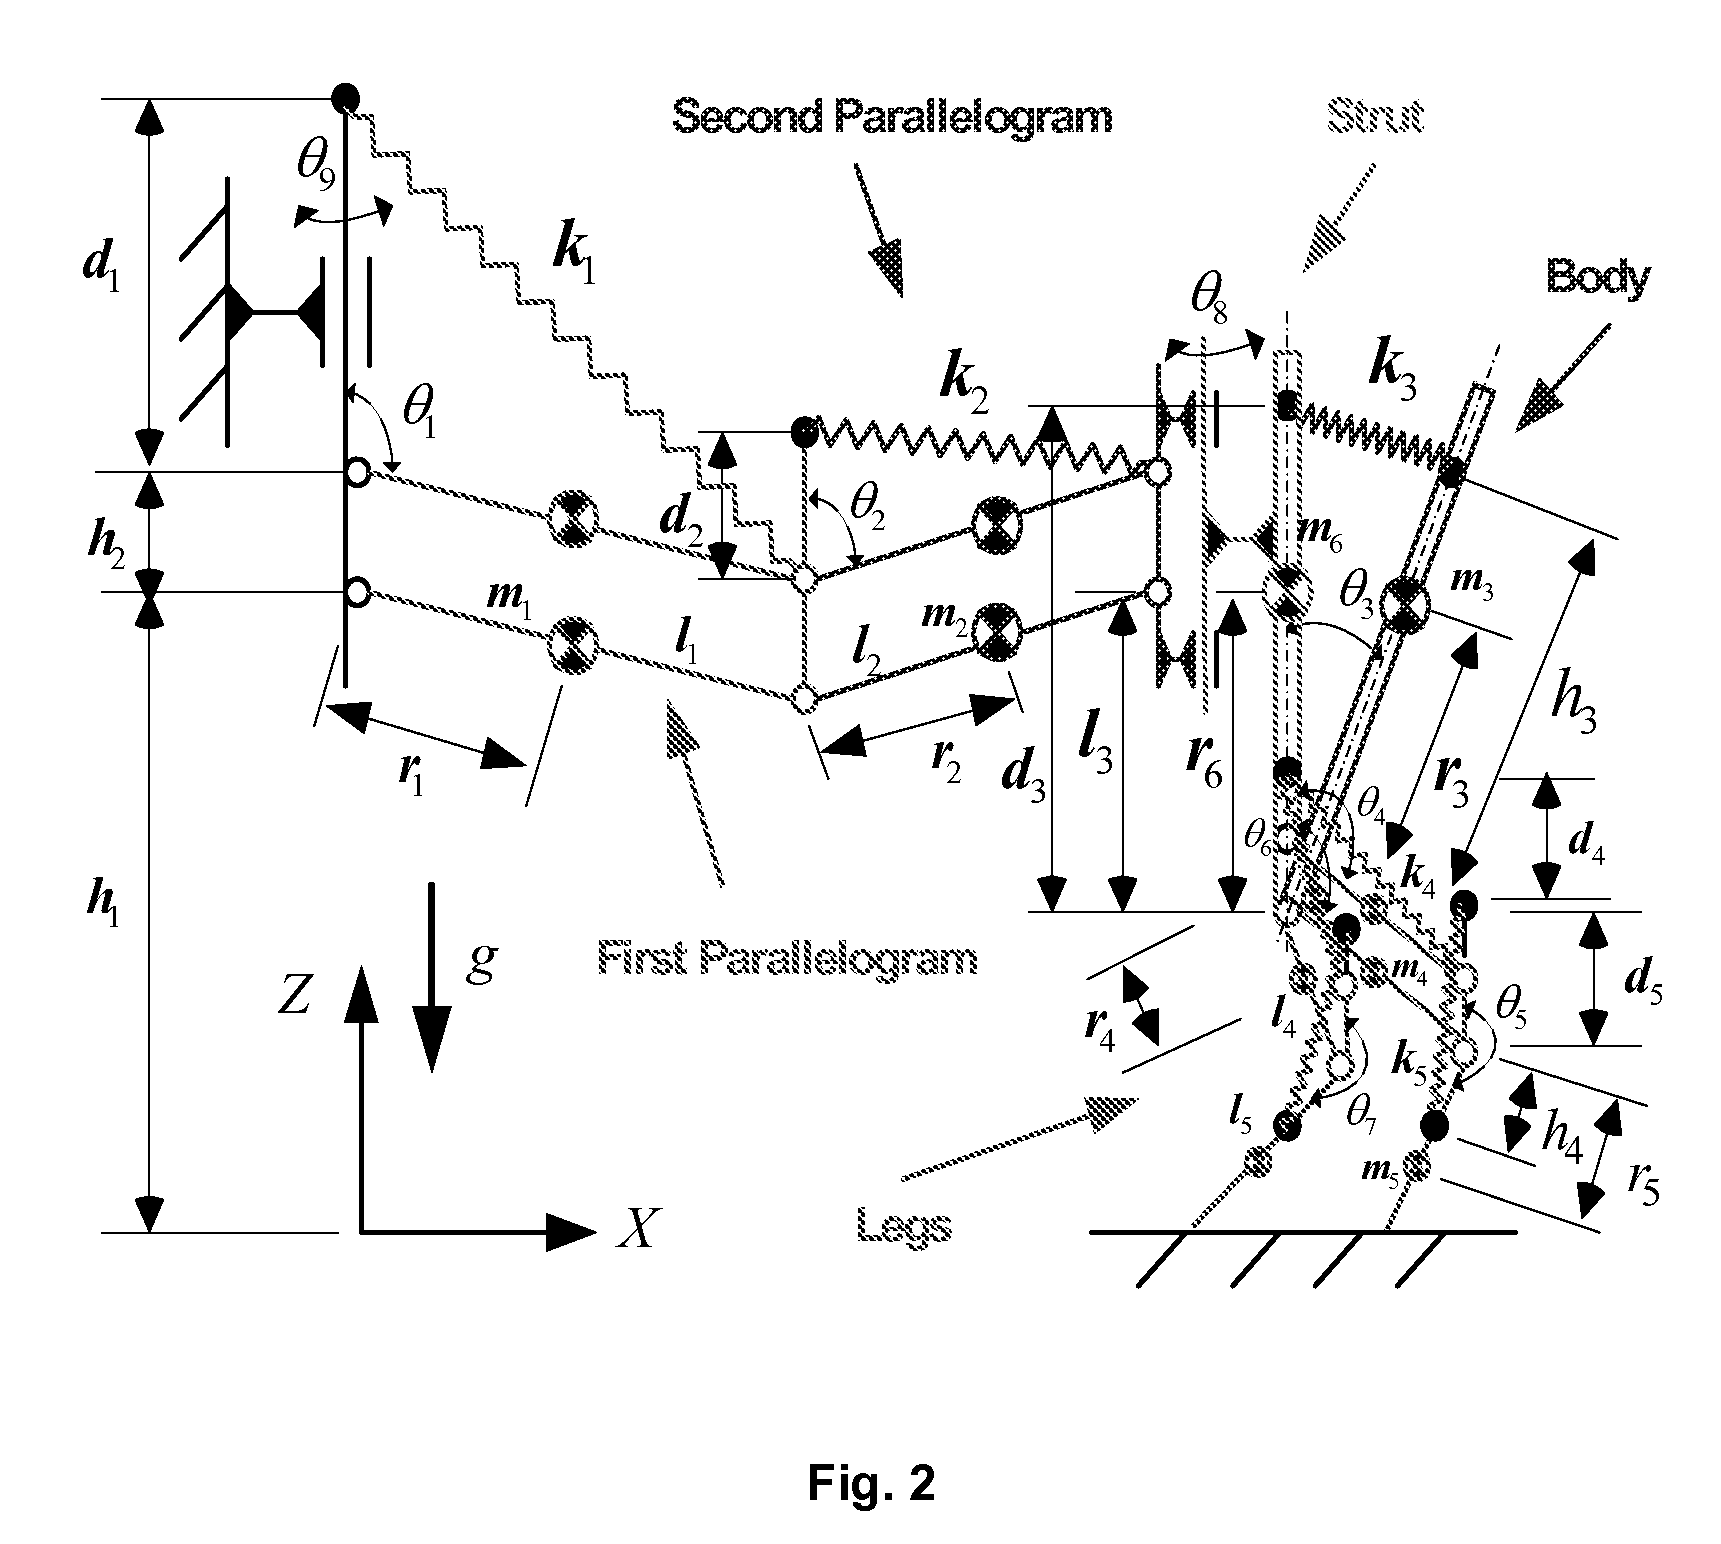 Apparatus and method for reduced-gravity simulation